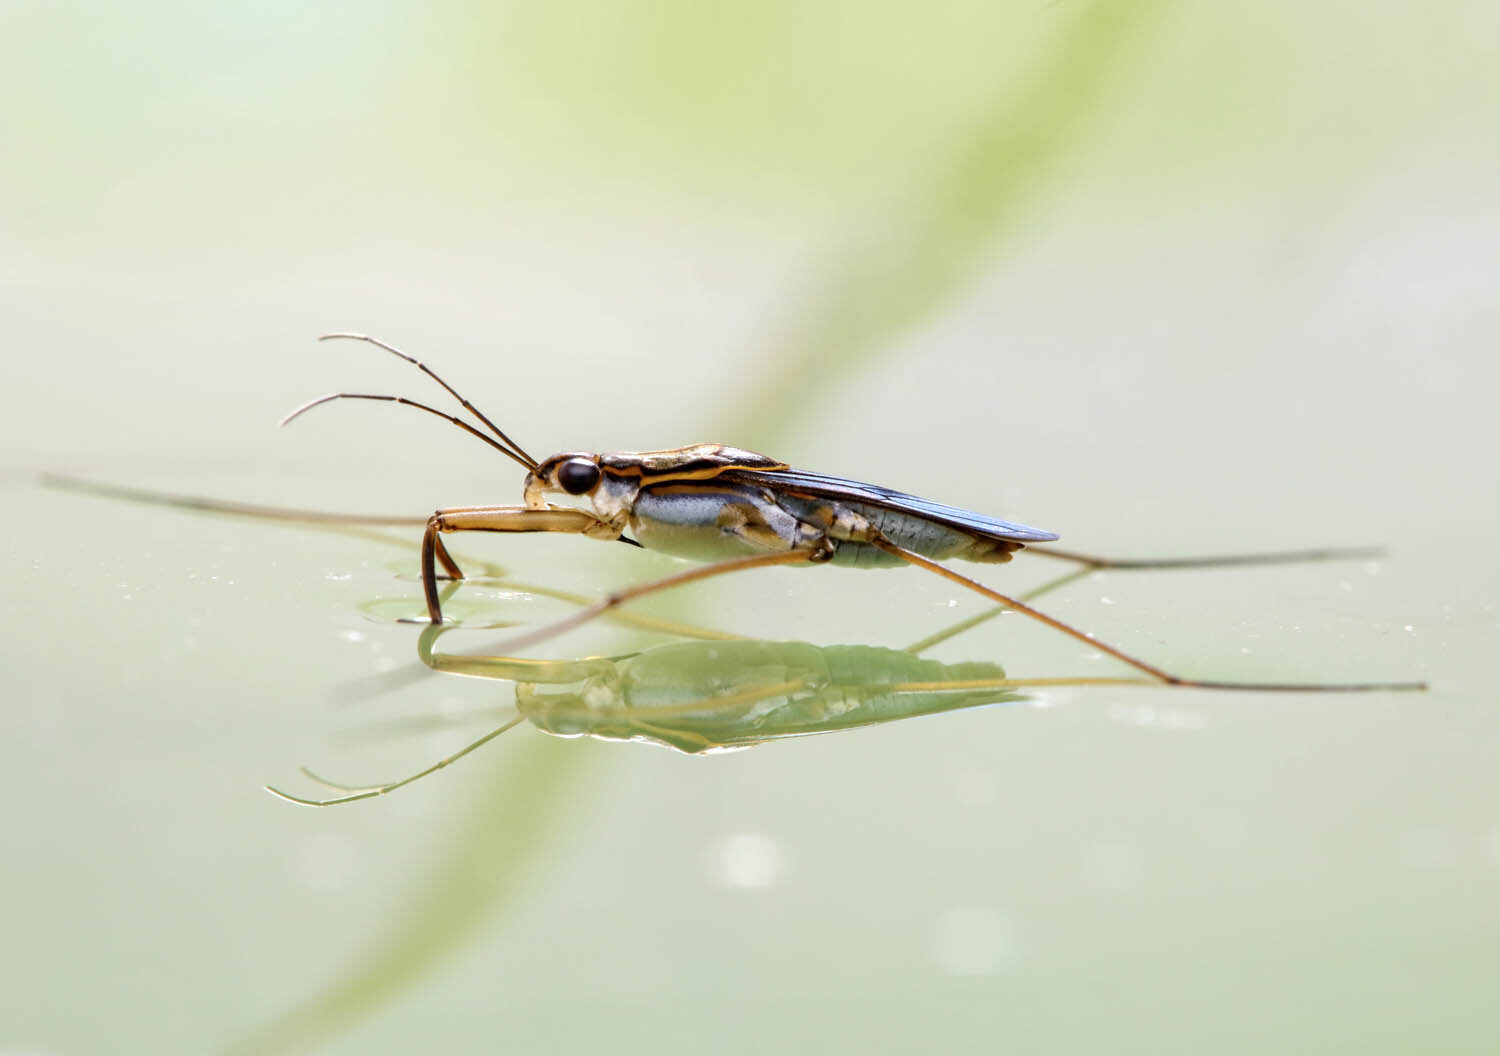 Water strider, Canon 5DsR, 100mm, 1/200s, f/16, ISO 200